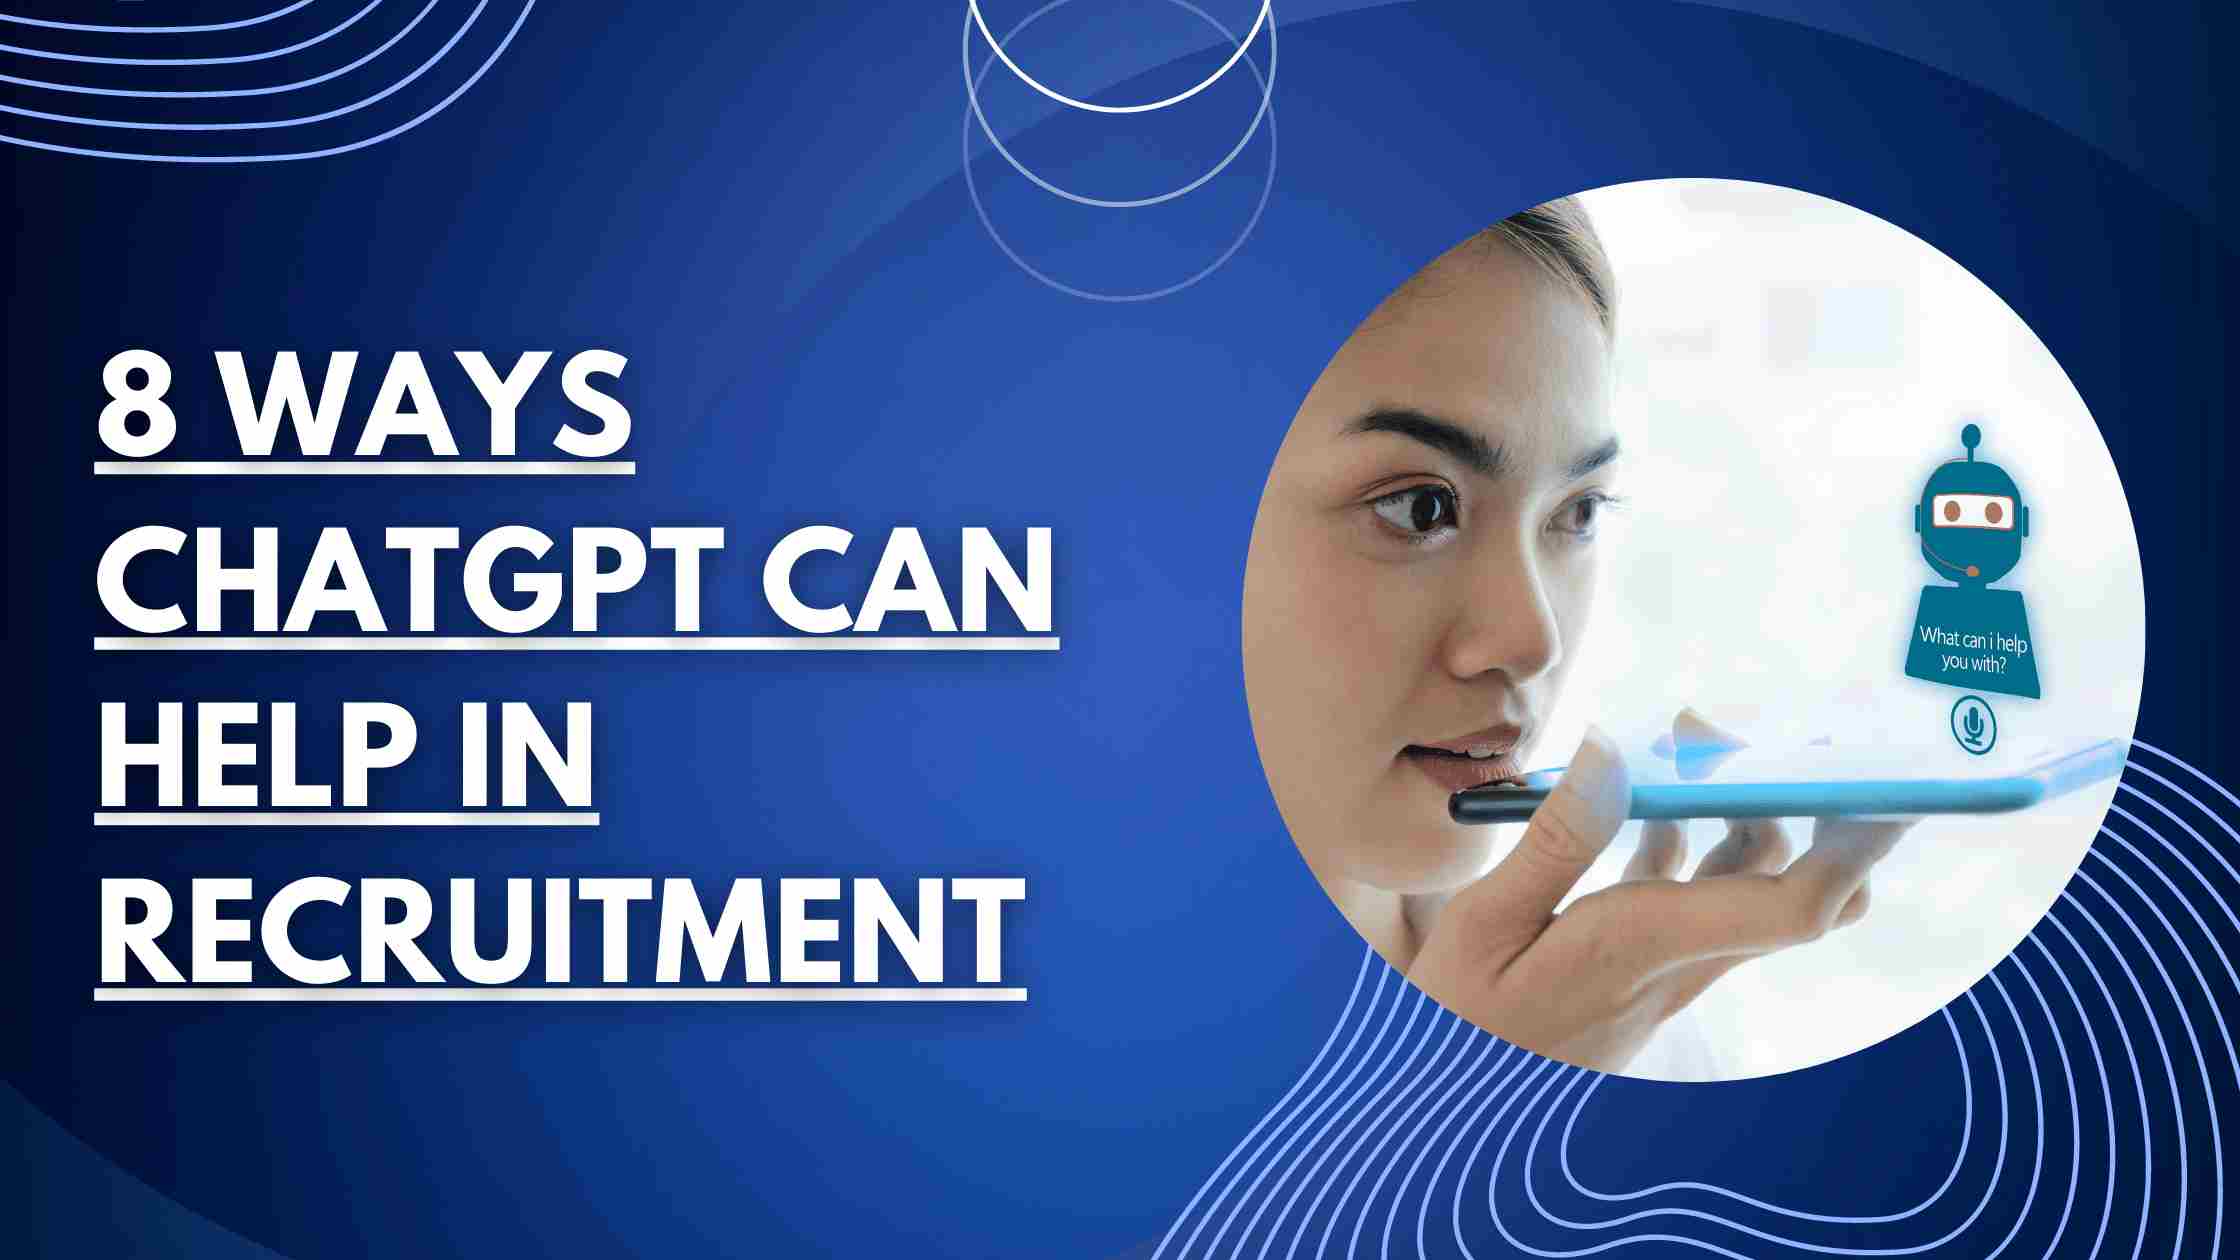 8 Ways Chatgpt Can Help In Recruitment